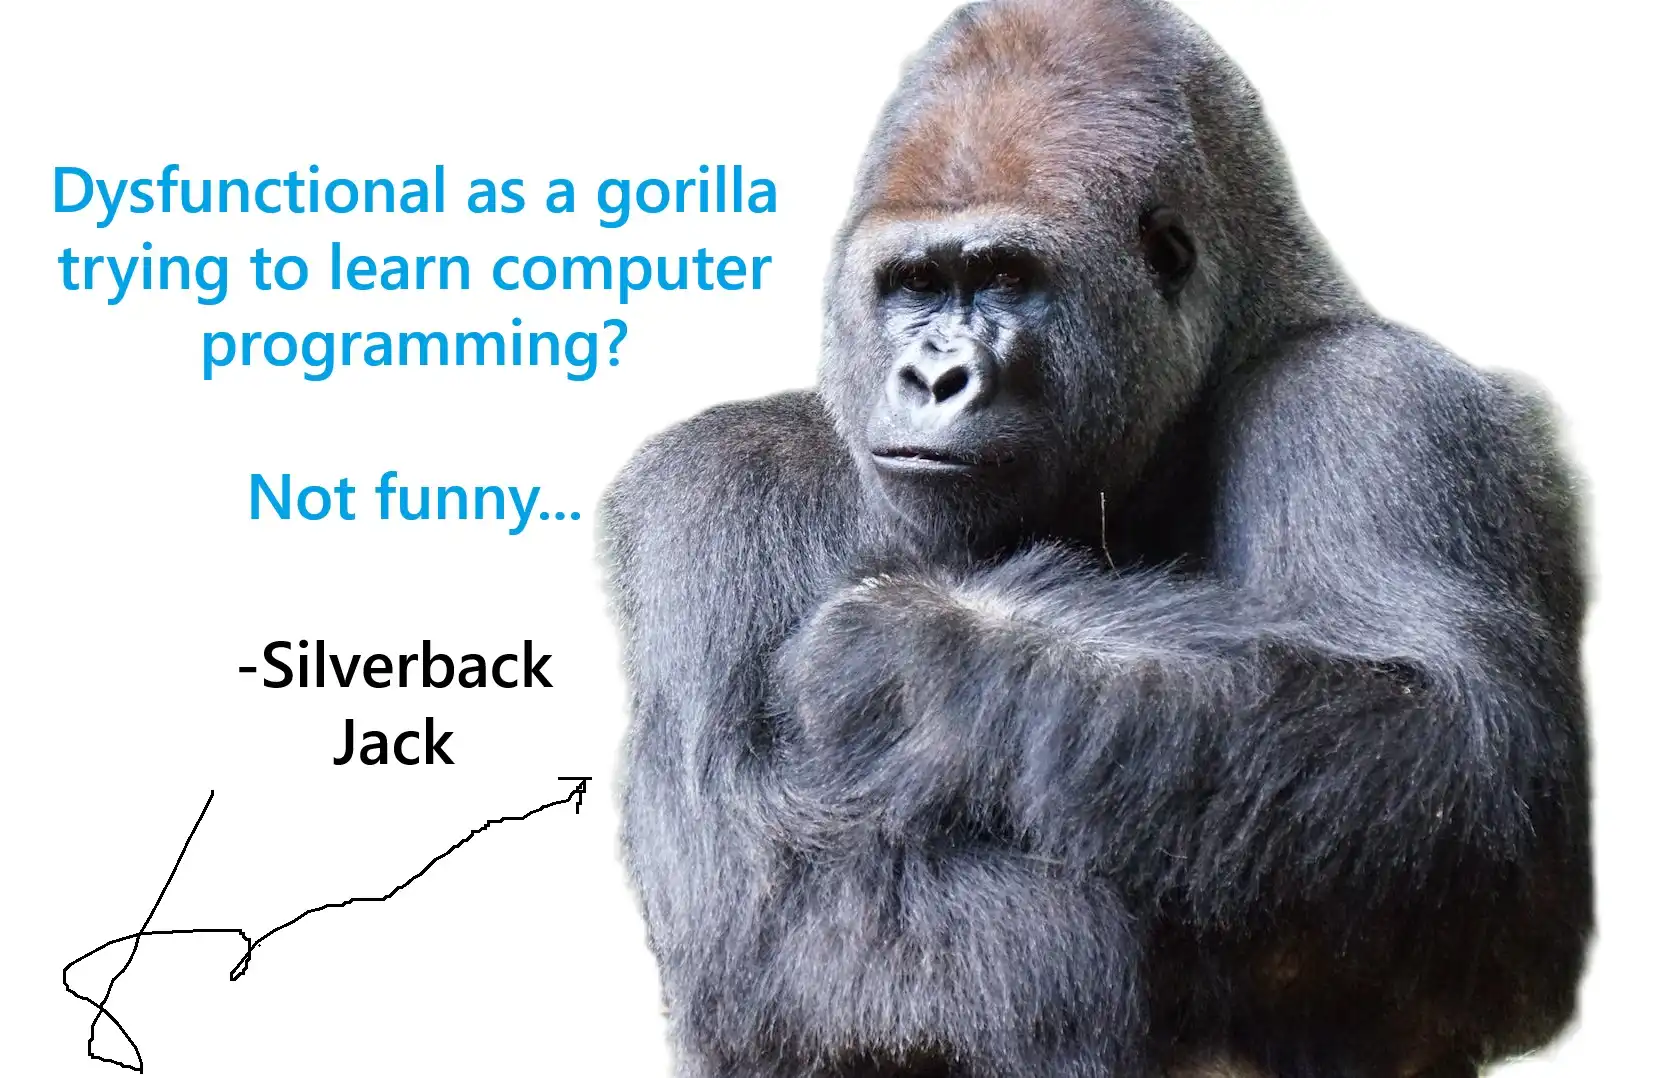 Funny and grumpy gorilla crossing his arms as he makes an inside joke about a comment in a UX and UI web design blog post.